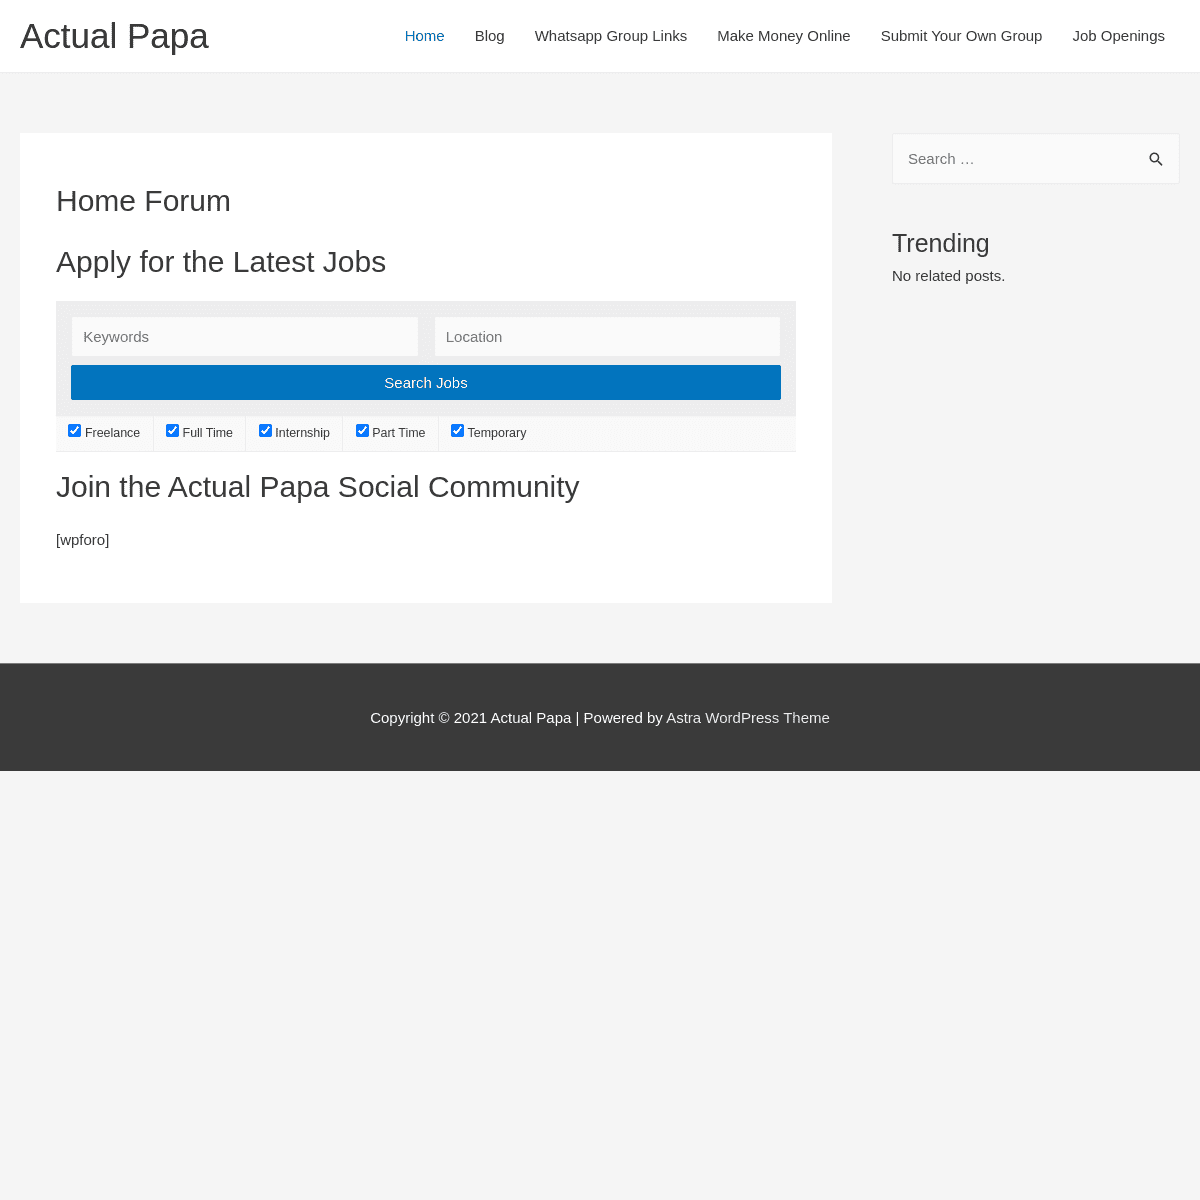 A complete backup of https://actualpapa.com